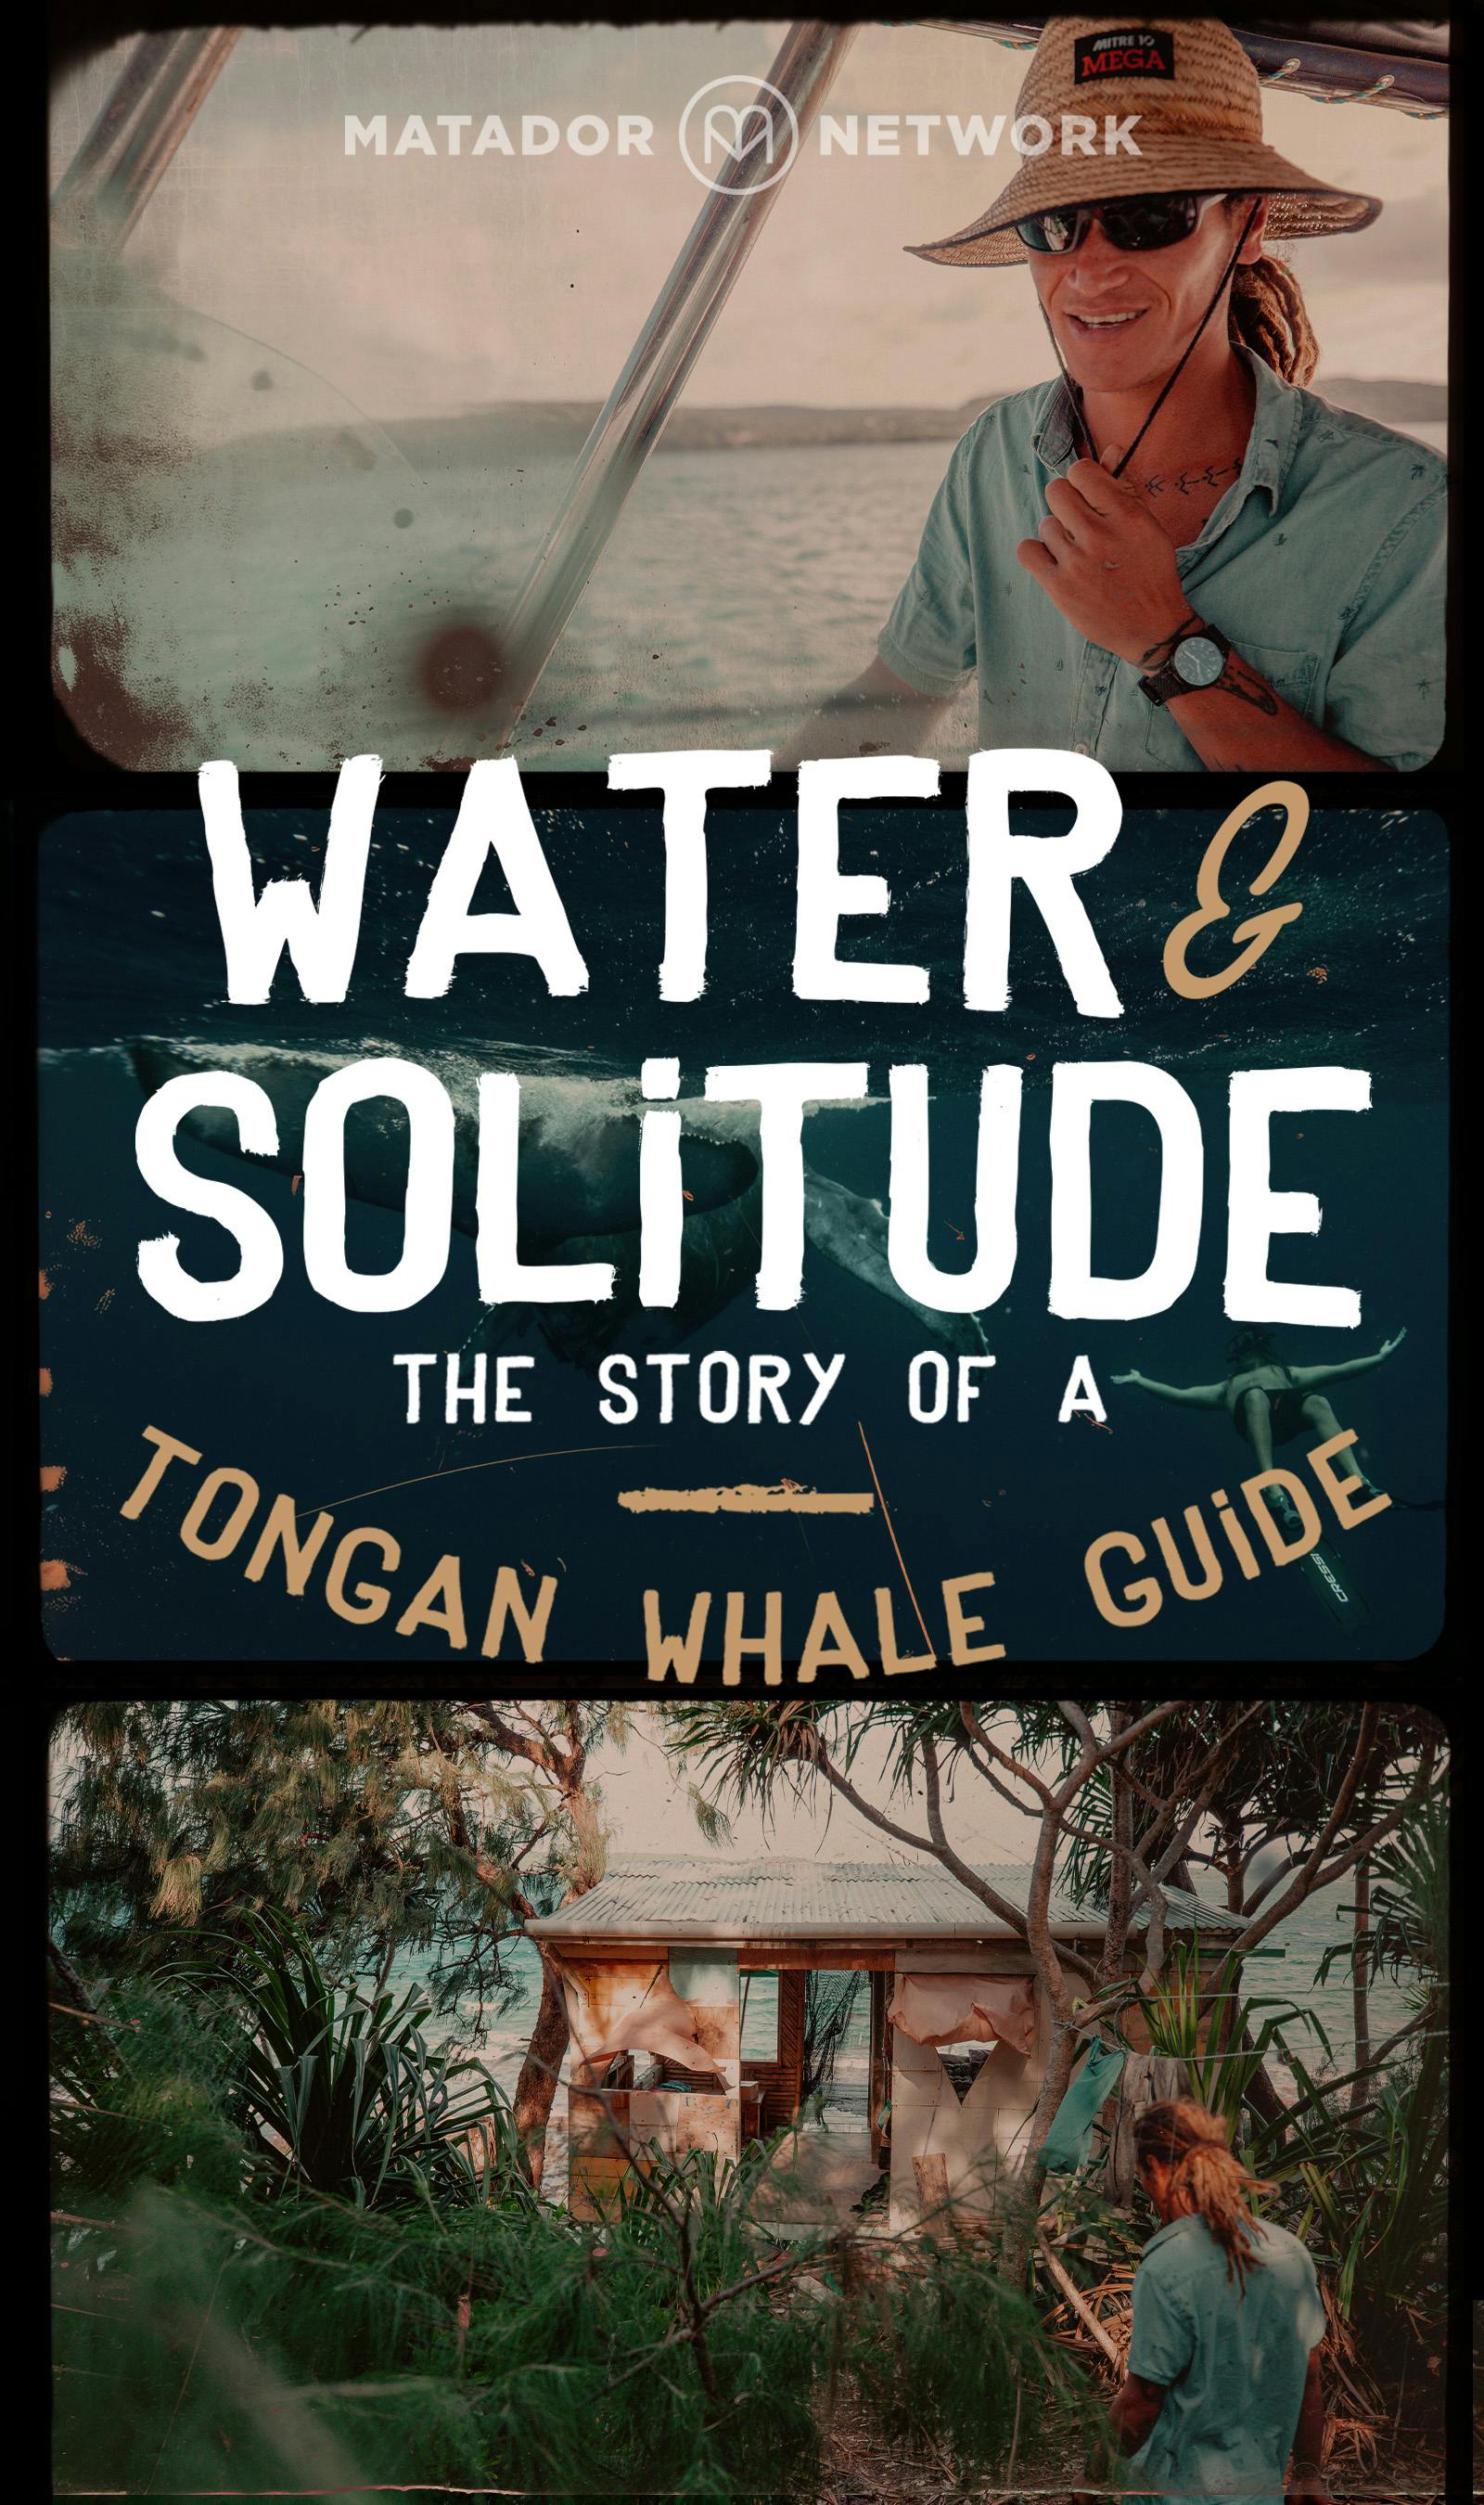 Water & Solitude: A Tongan Whale Guide